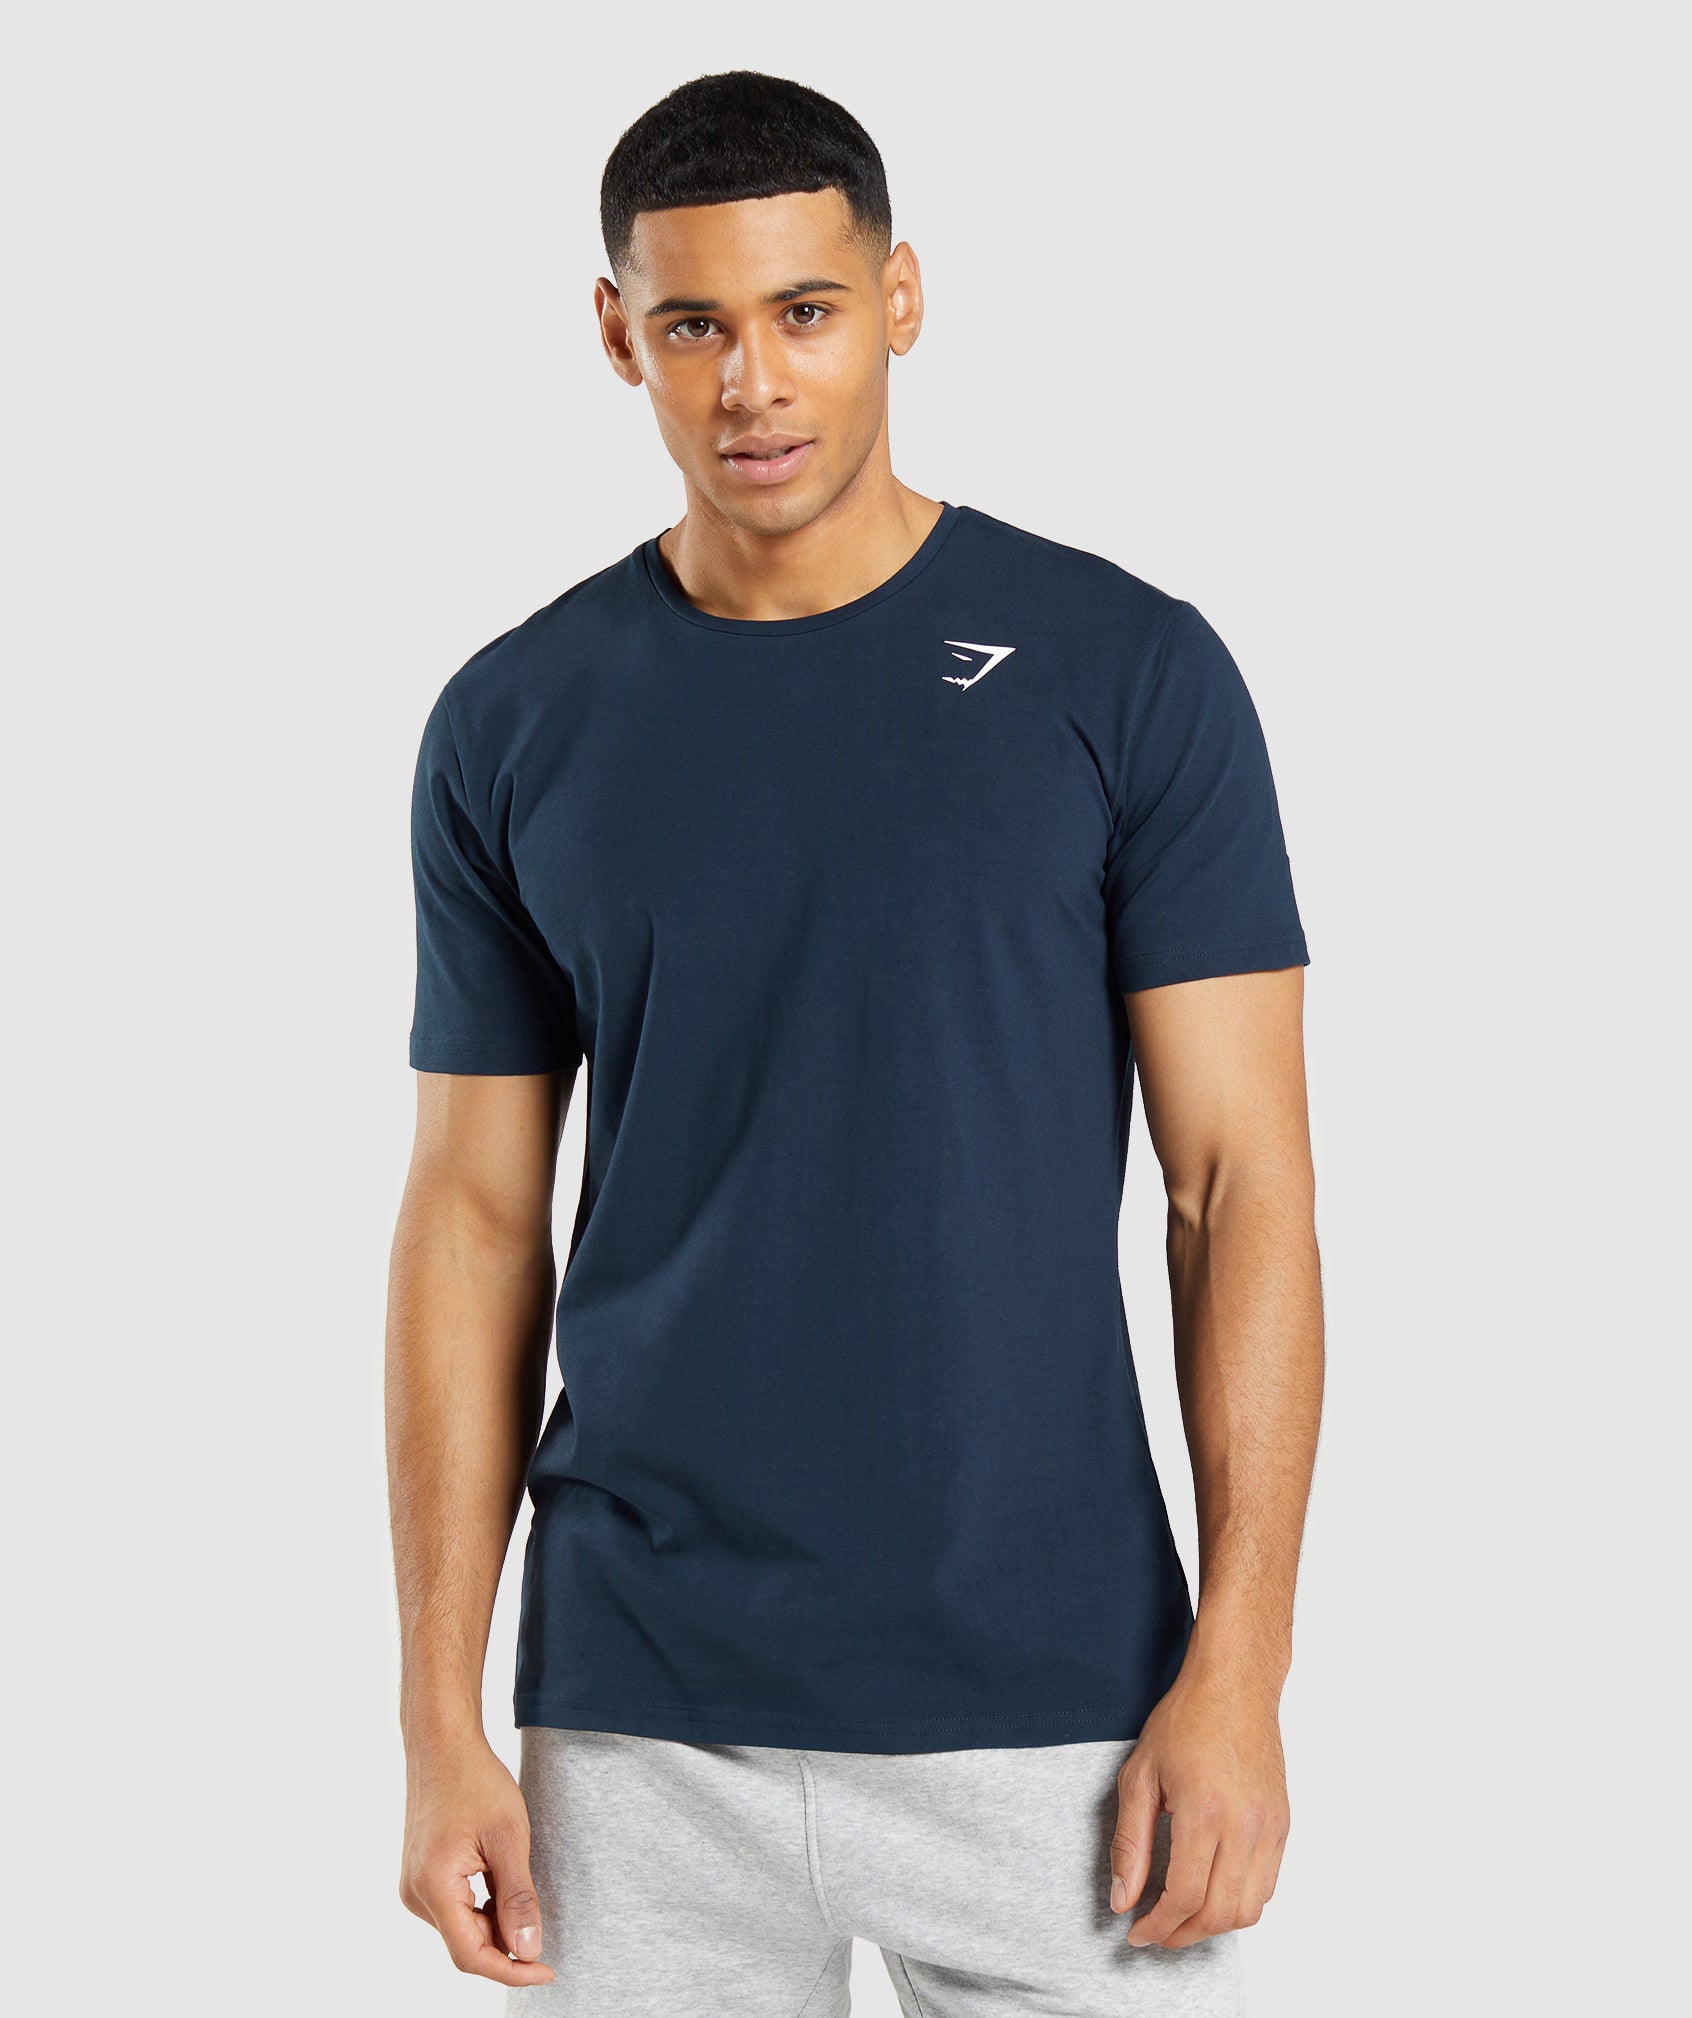 Essential T-Shirt in Navy - view 1